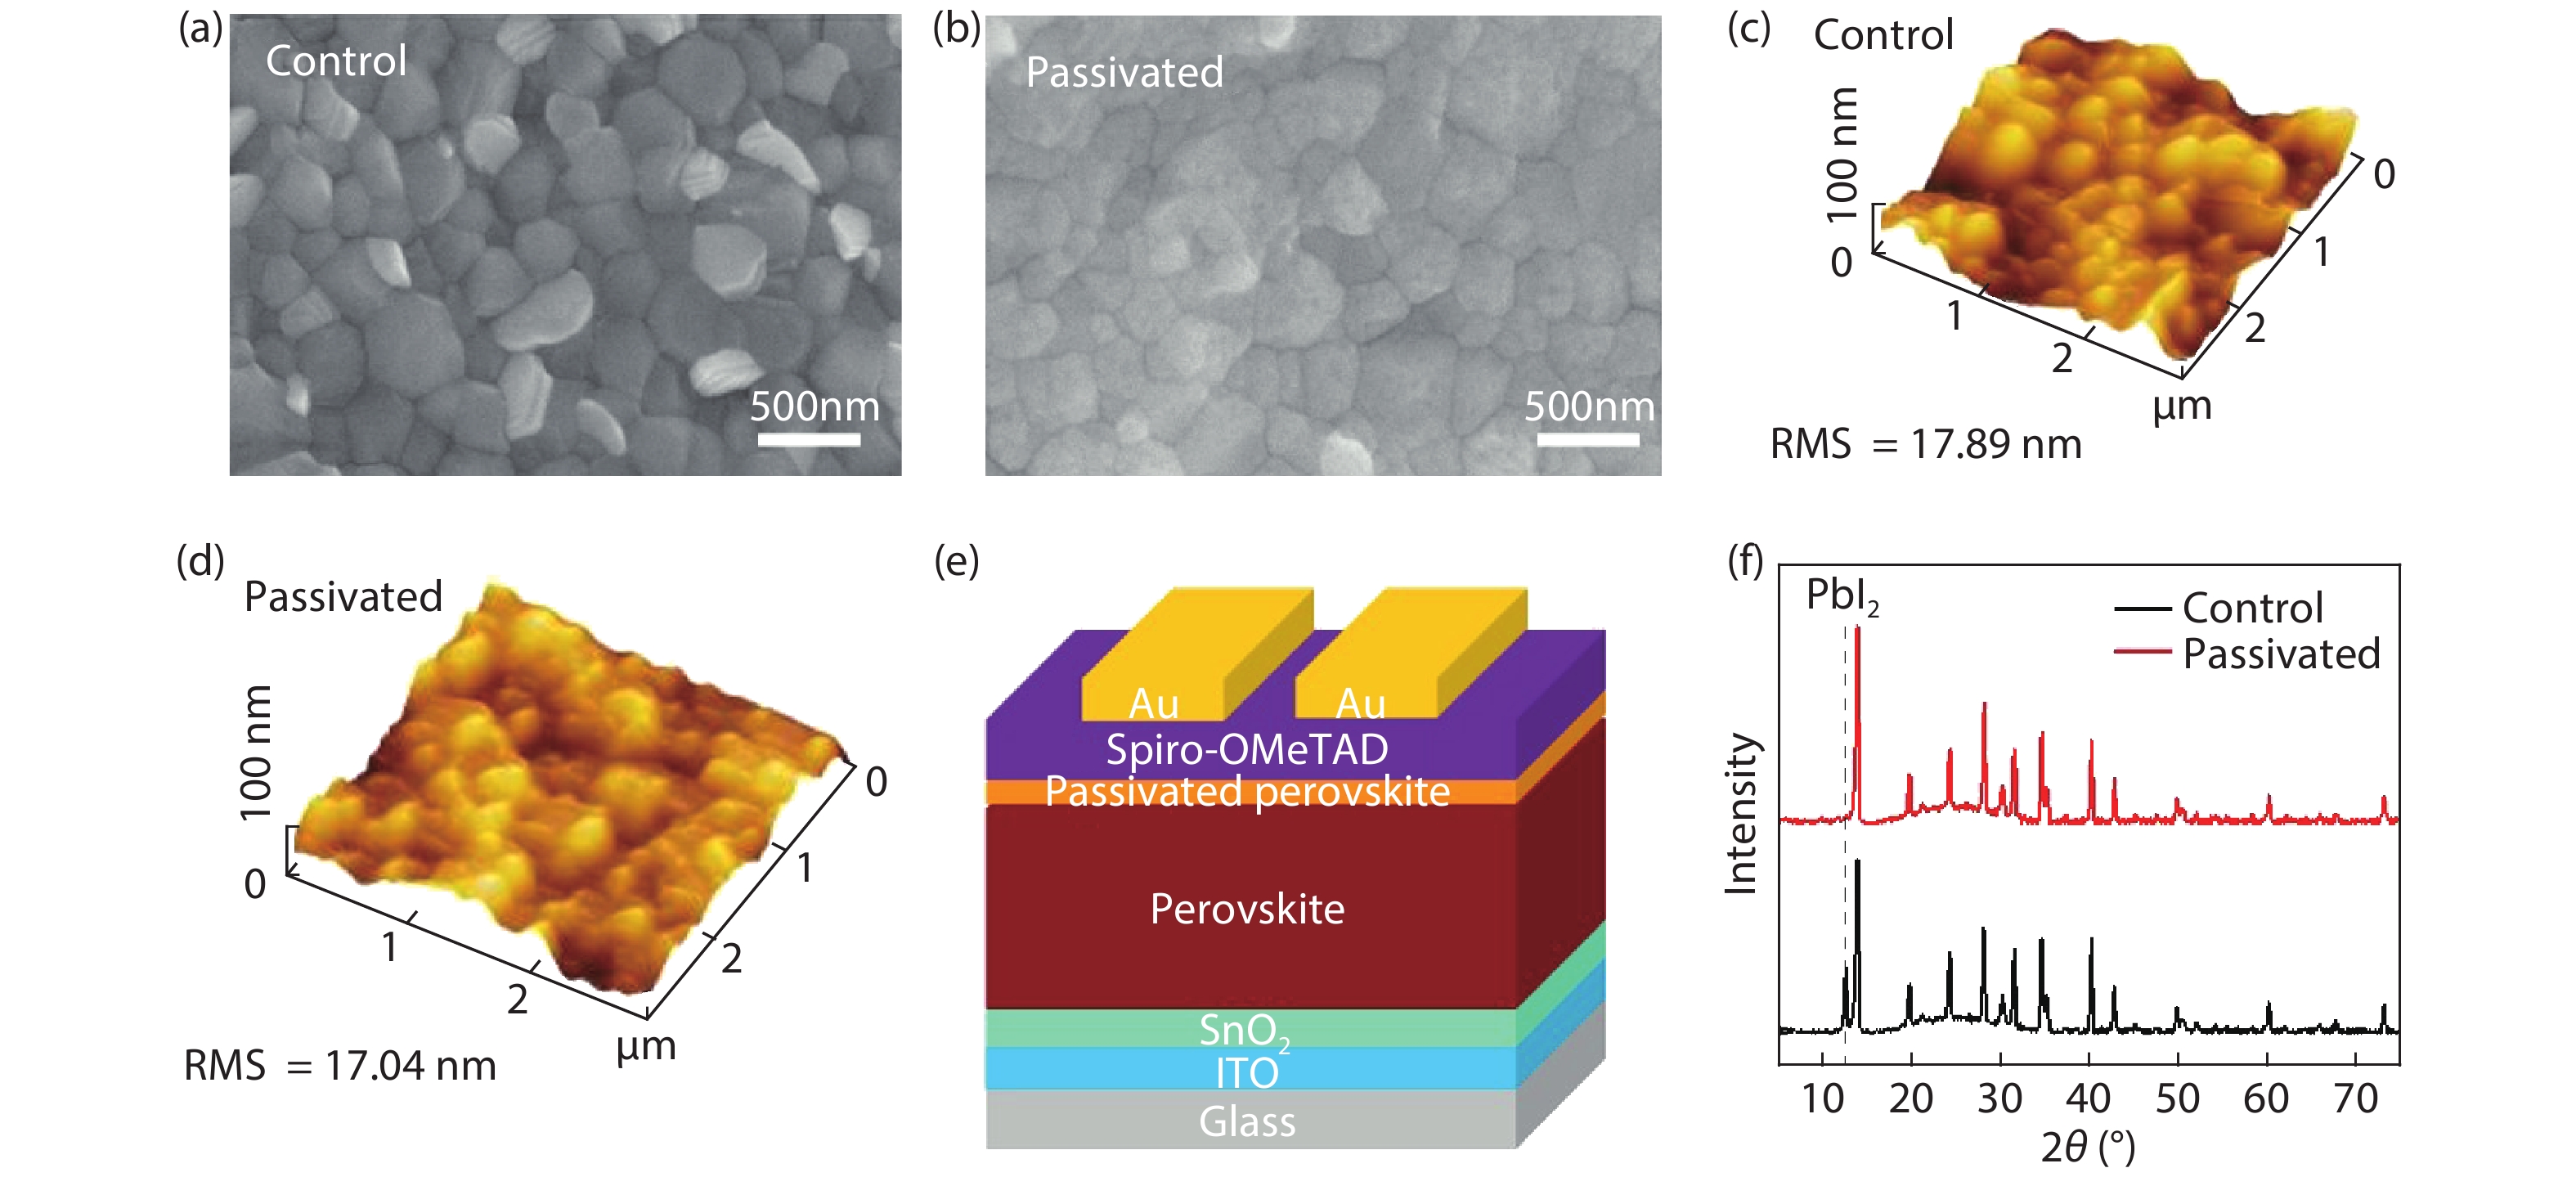 (Color online) SEM and AFM images of (a, c) control and (b, d) passivated perovskite films on ITO/SnO2 substrates. (e) Device structure of the passivated perovskite solar cells. (f) XRD patterns of passivated and control perovskite films.